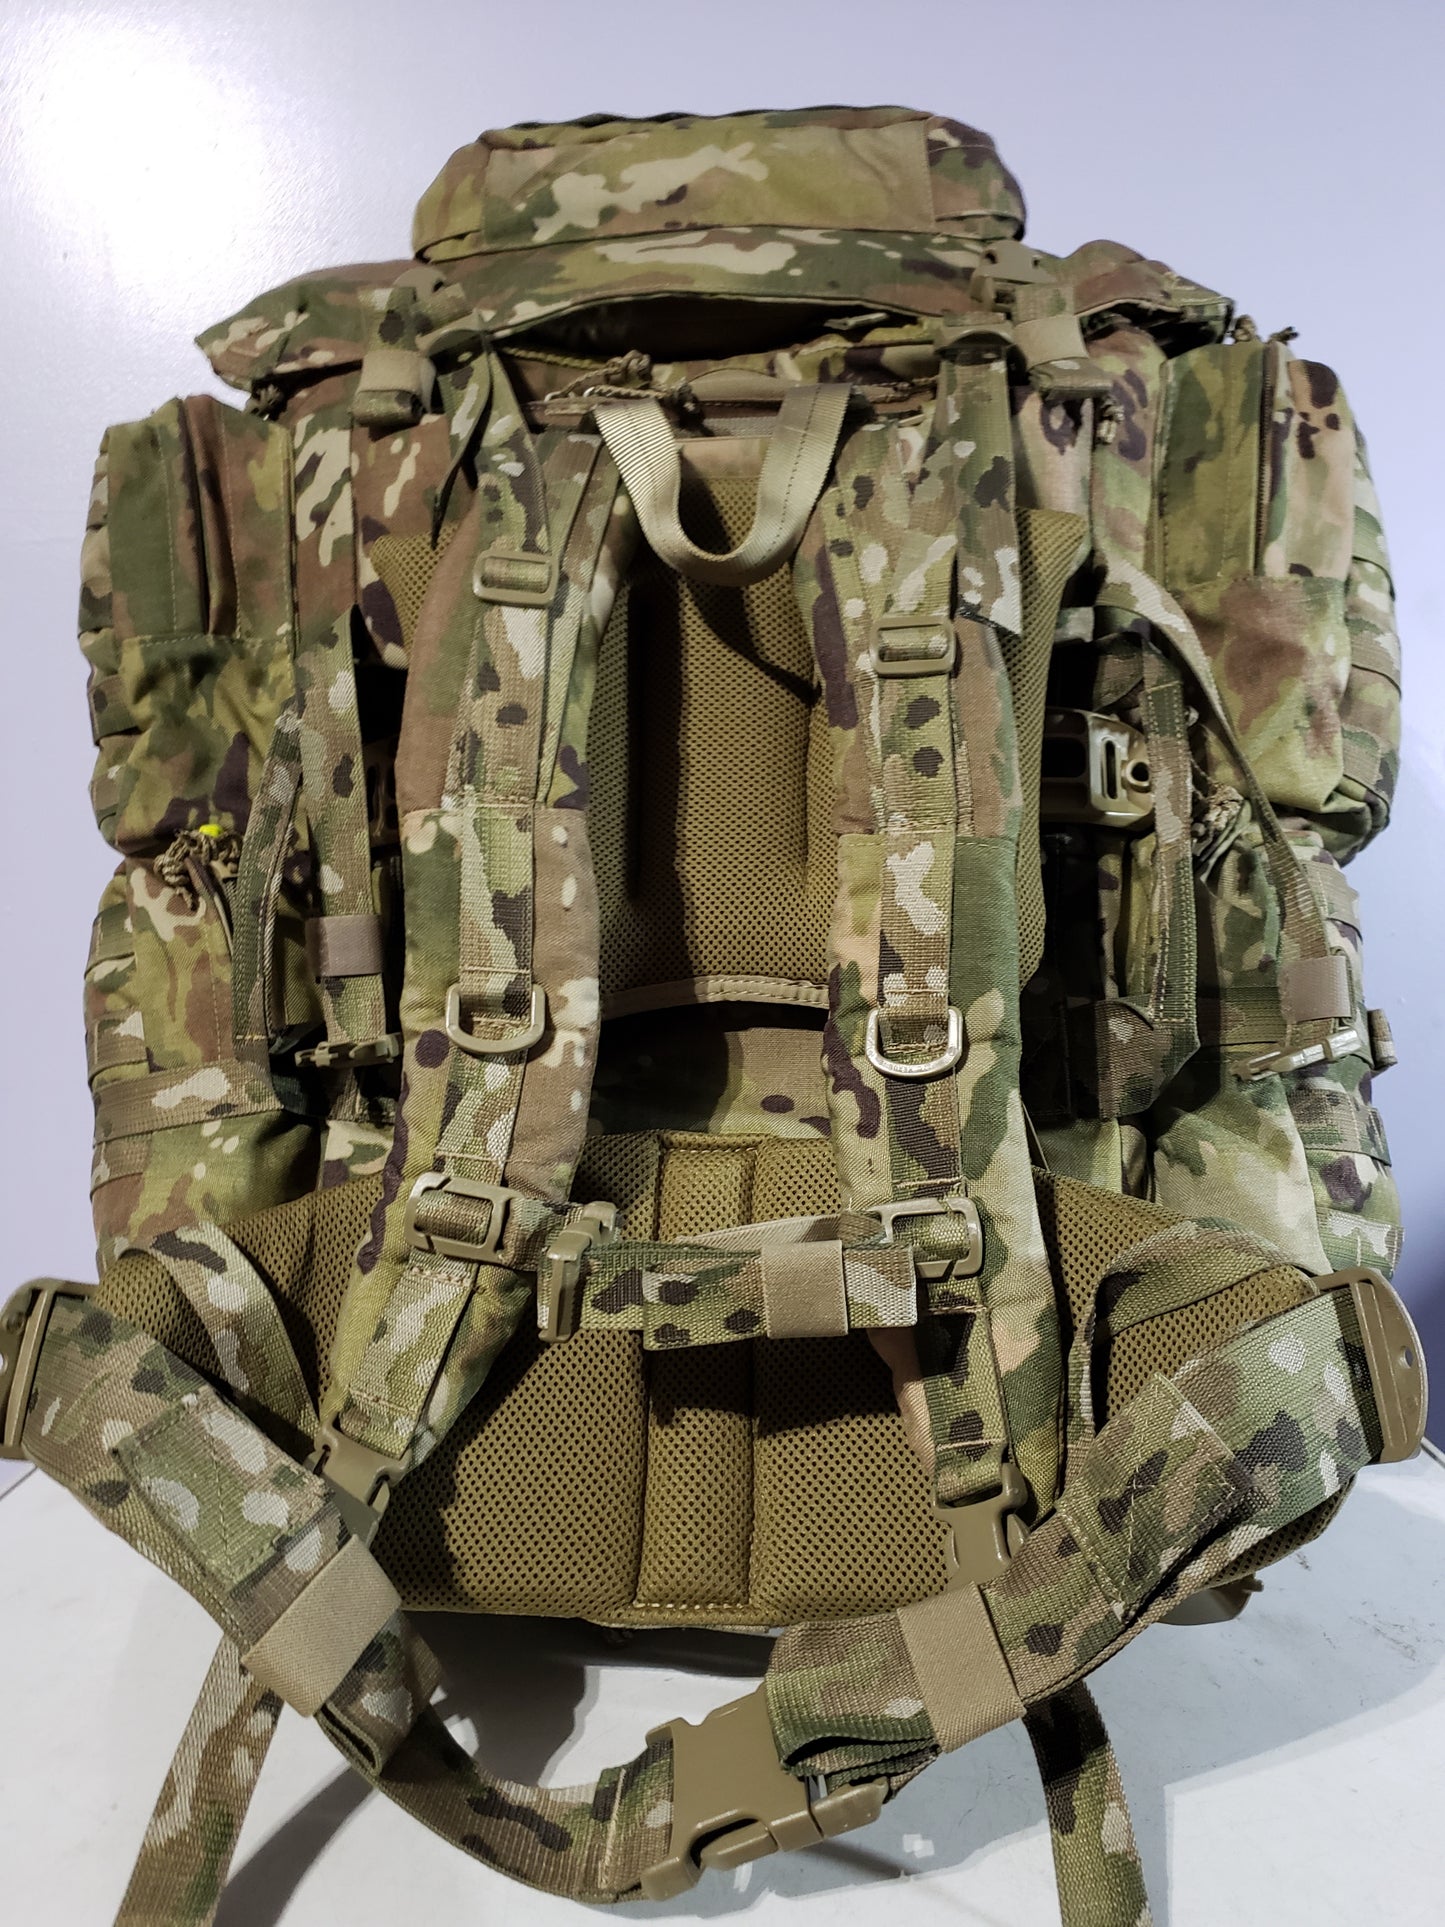 carry handles - sasquatch - bigfoot -BACK PACK - ruck sack - backpack - rucksack - ruck - military style - tactical pack - black tactical - usa made gear - us - civilian pack - overland - outdoor - contingency - resiliency - self reliance - camping - hunting - off grid - survial pack - emergency pack - travel pack - internal frame 